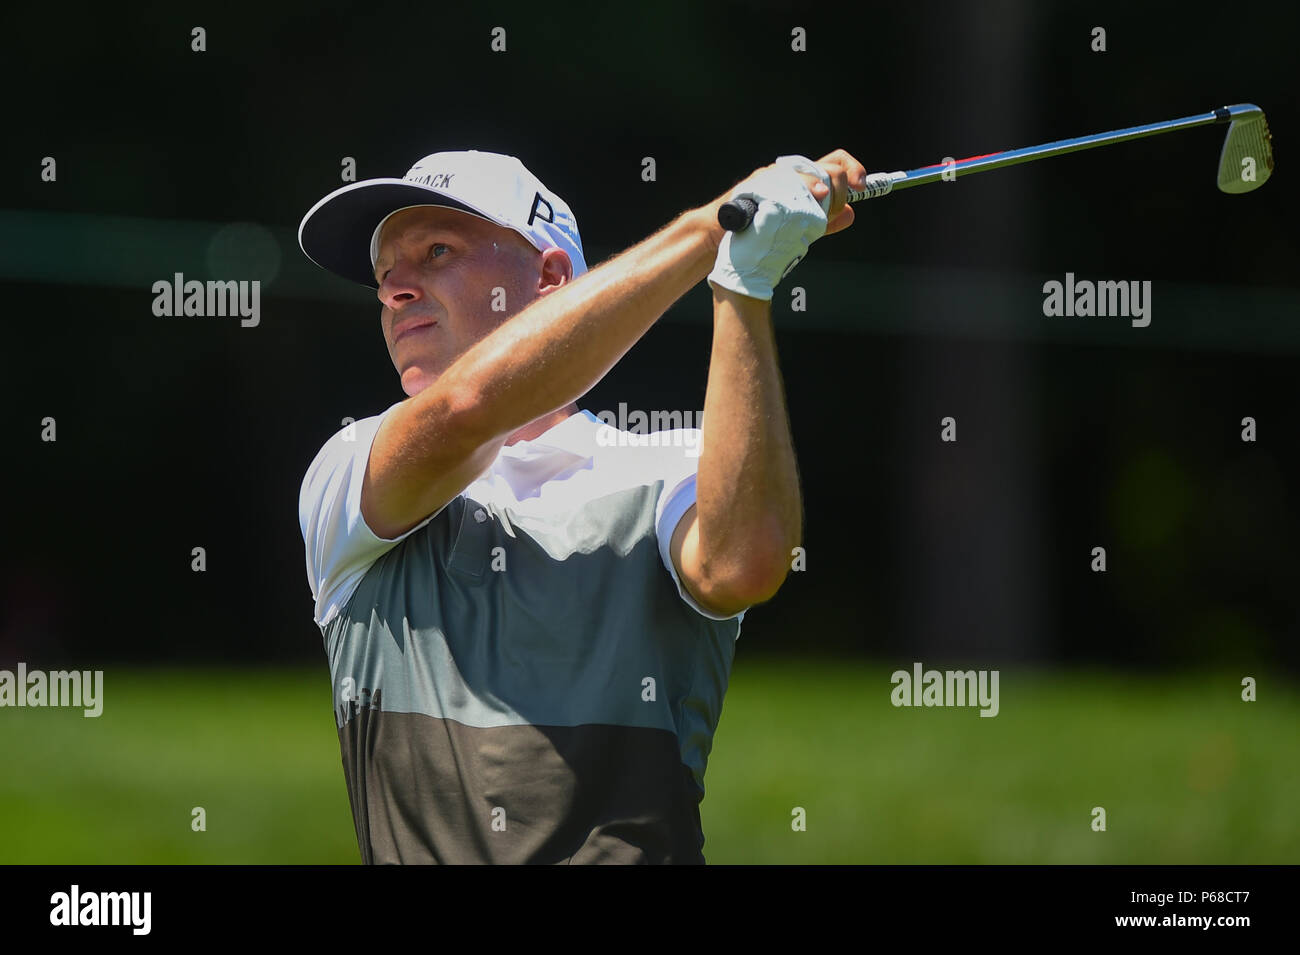 Potomac MD, USA. 28th June, 2018. Ben Crane (USA) tees off at the par three ninth hole during the opening round at the 2018 Quicken Loans National at the Tournament Players Club in Potomac MD. Credit: Cal Sport Media/Alamy Live News Stock Photo